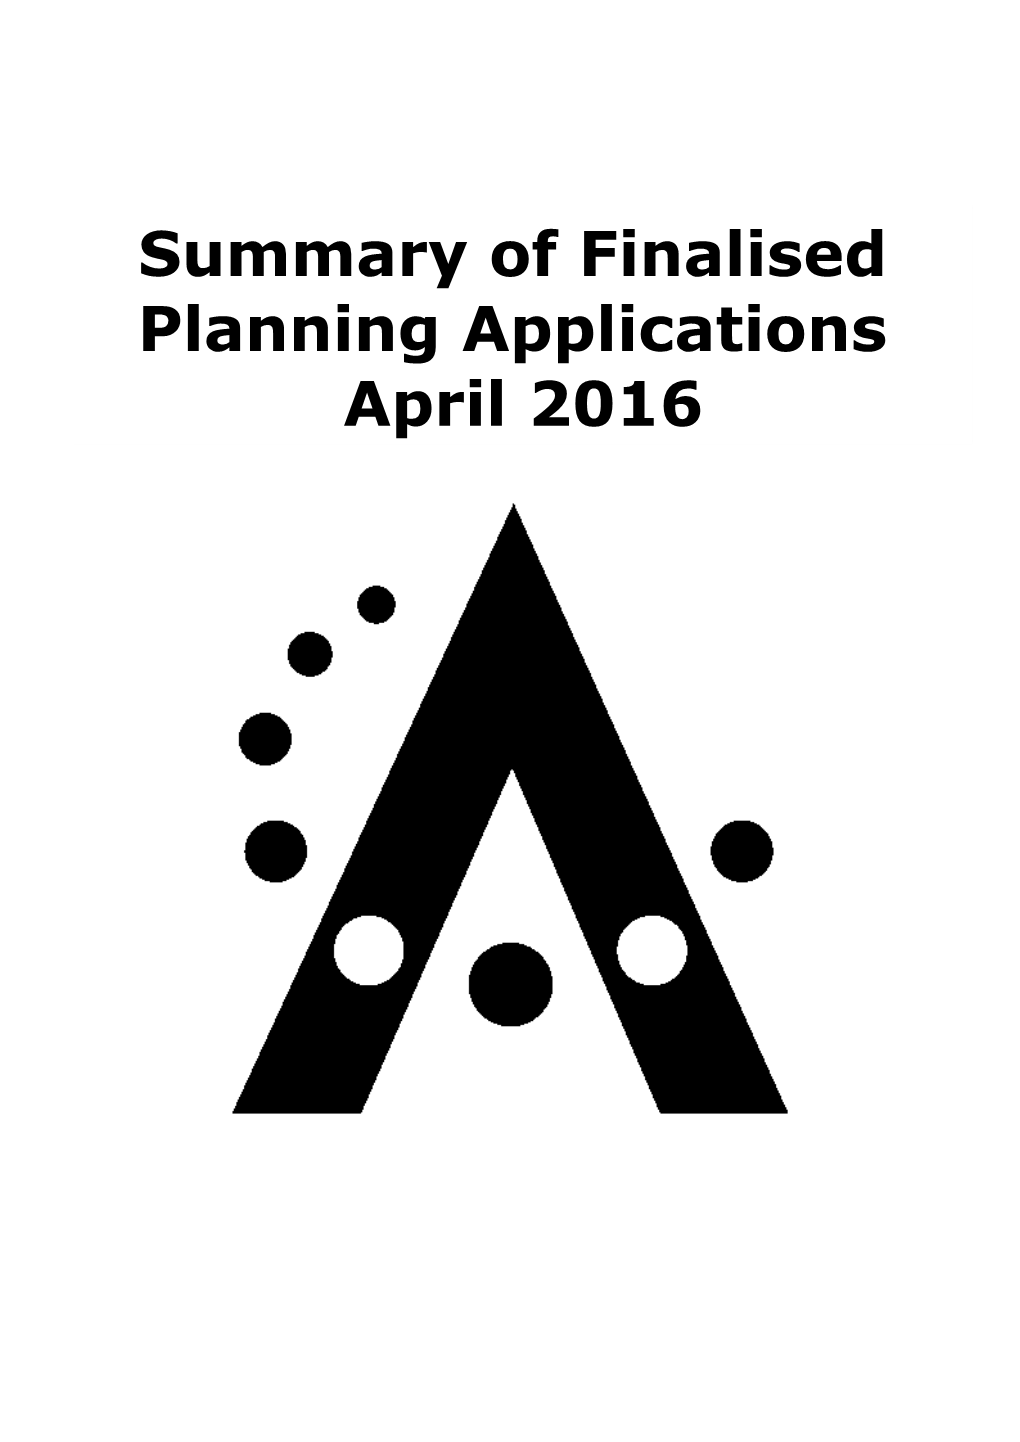 Summary of Finalised Planning Applications April 2016 Summary of Finalised Planning Applications April 2016